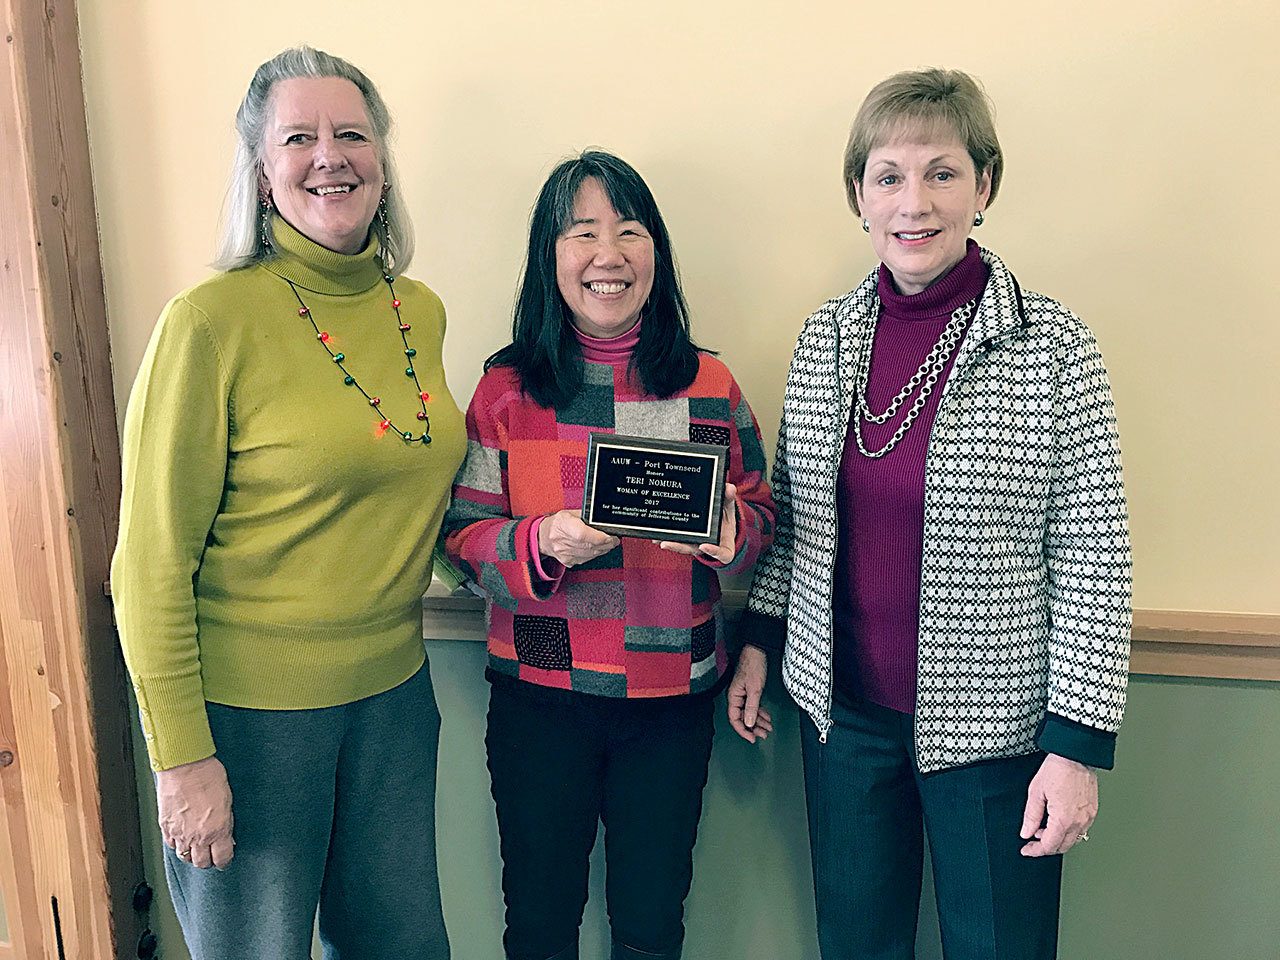 Teri Nomura, center, recipient of American Association of University Women of Port Townsend’s Woman of Excellence award, poses with AAUW PT co-presidents Jean Stastny, left, and Lynn Meyer, right. (AAUW PT)